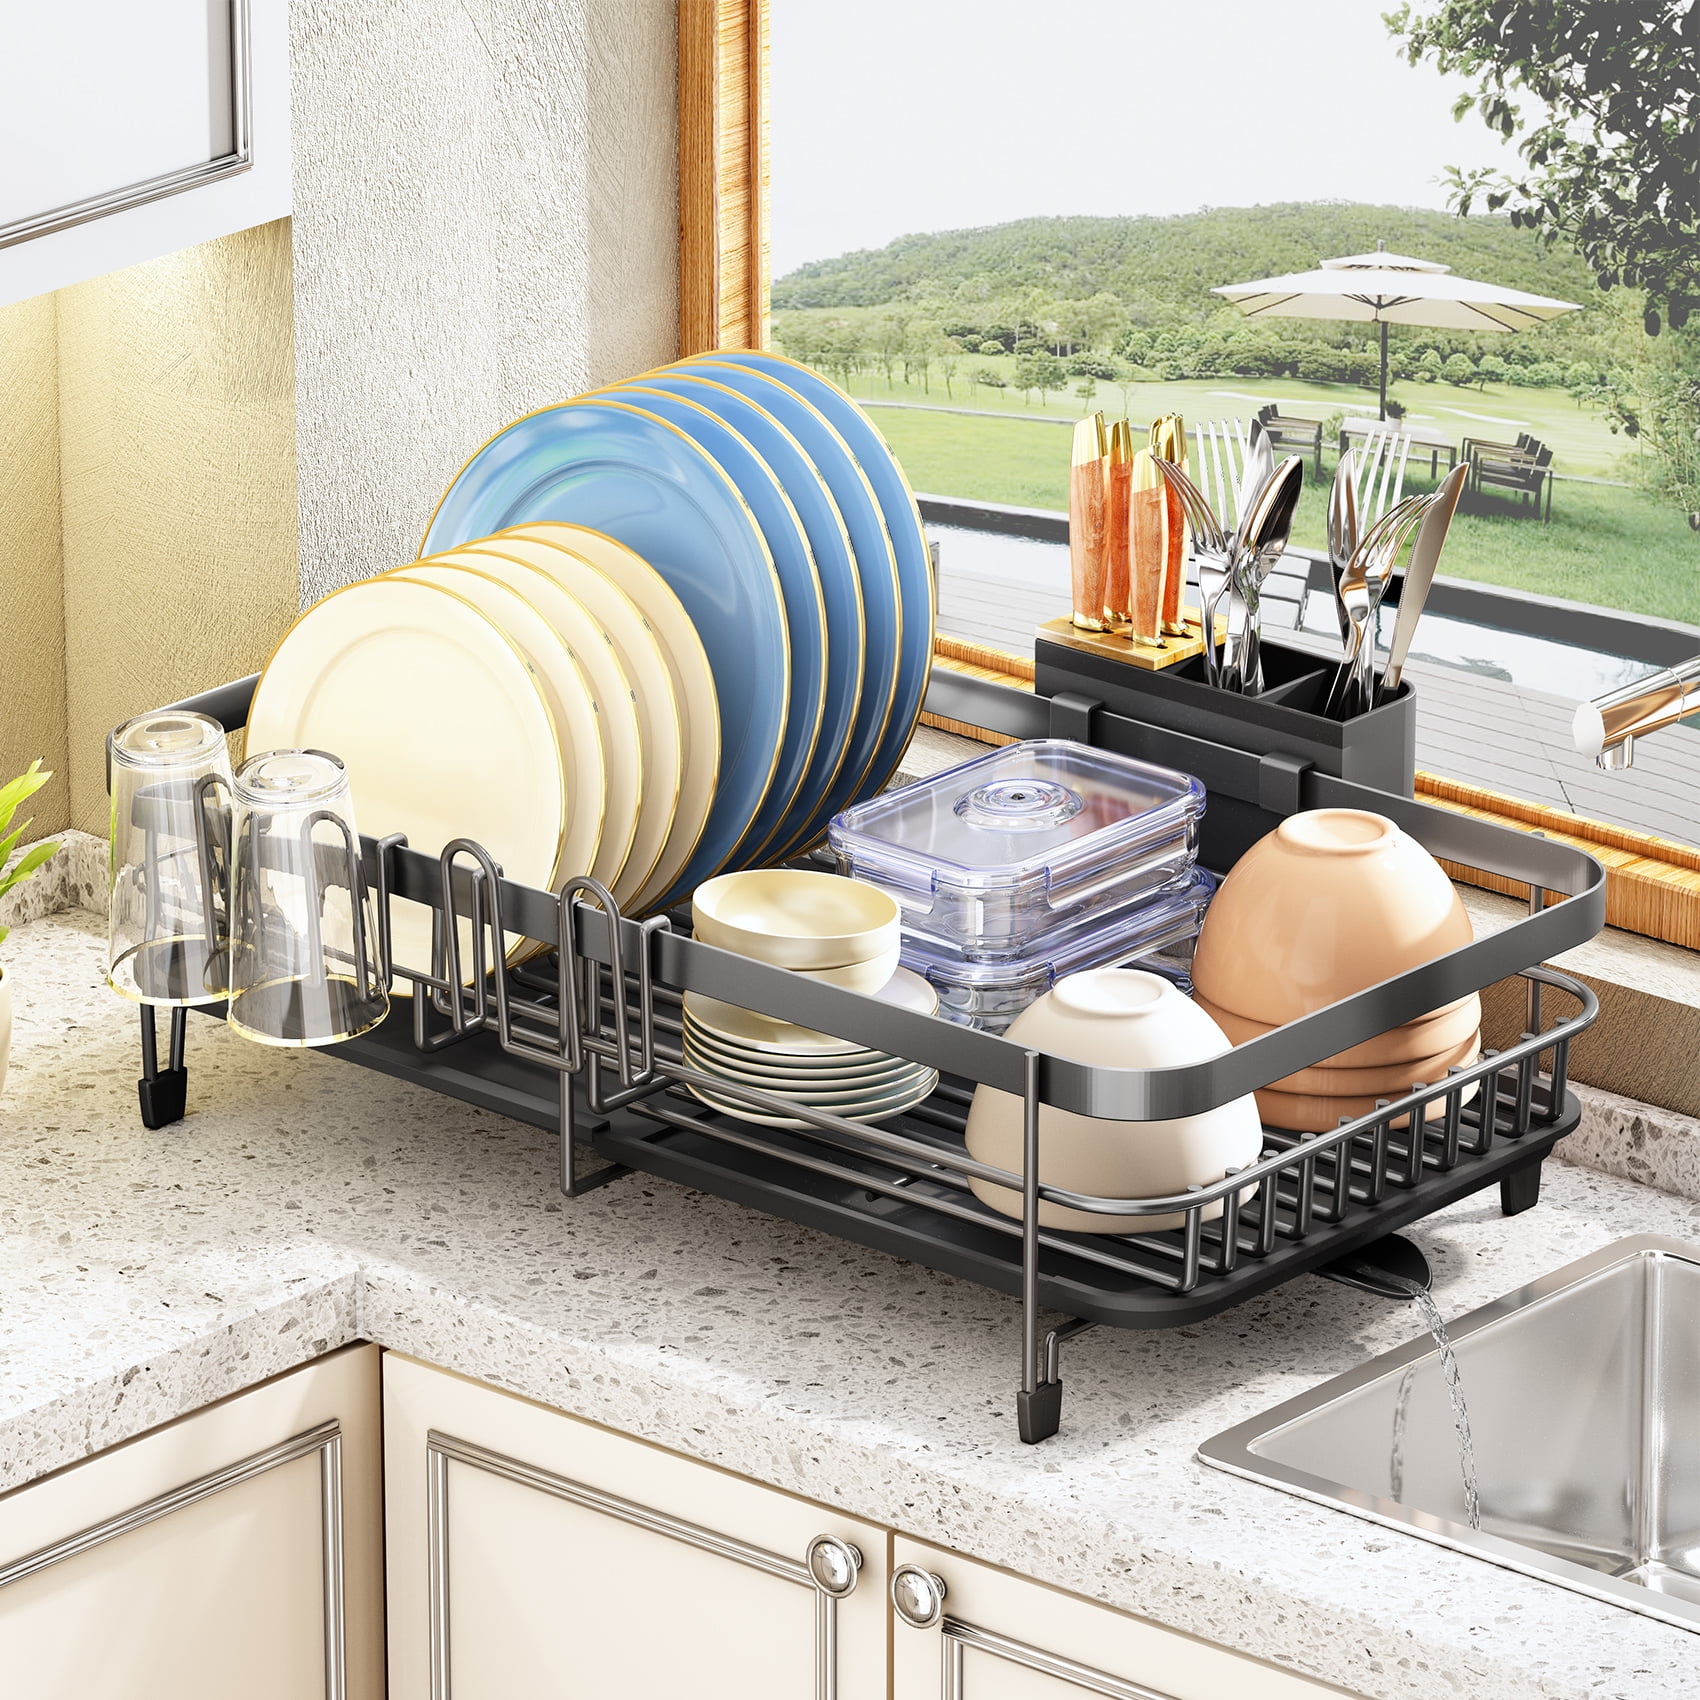 Large Dish Drying Rack With Drainboard Set, Extendable Dish Rack